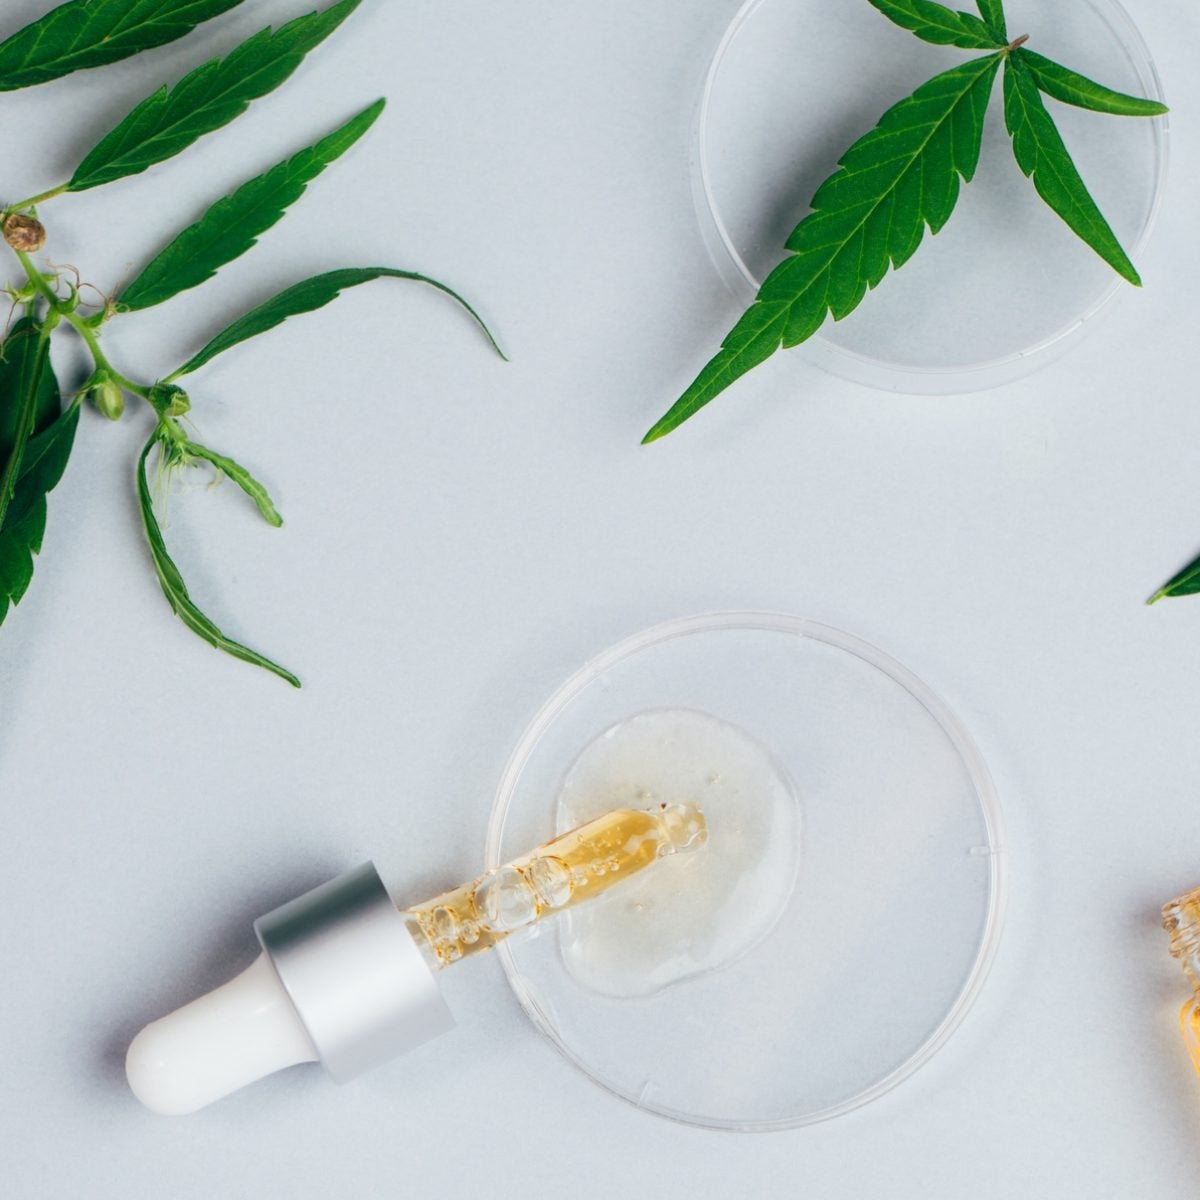 Treat Yourself To These Giftable CBD Products This Holiday Season